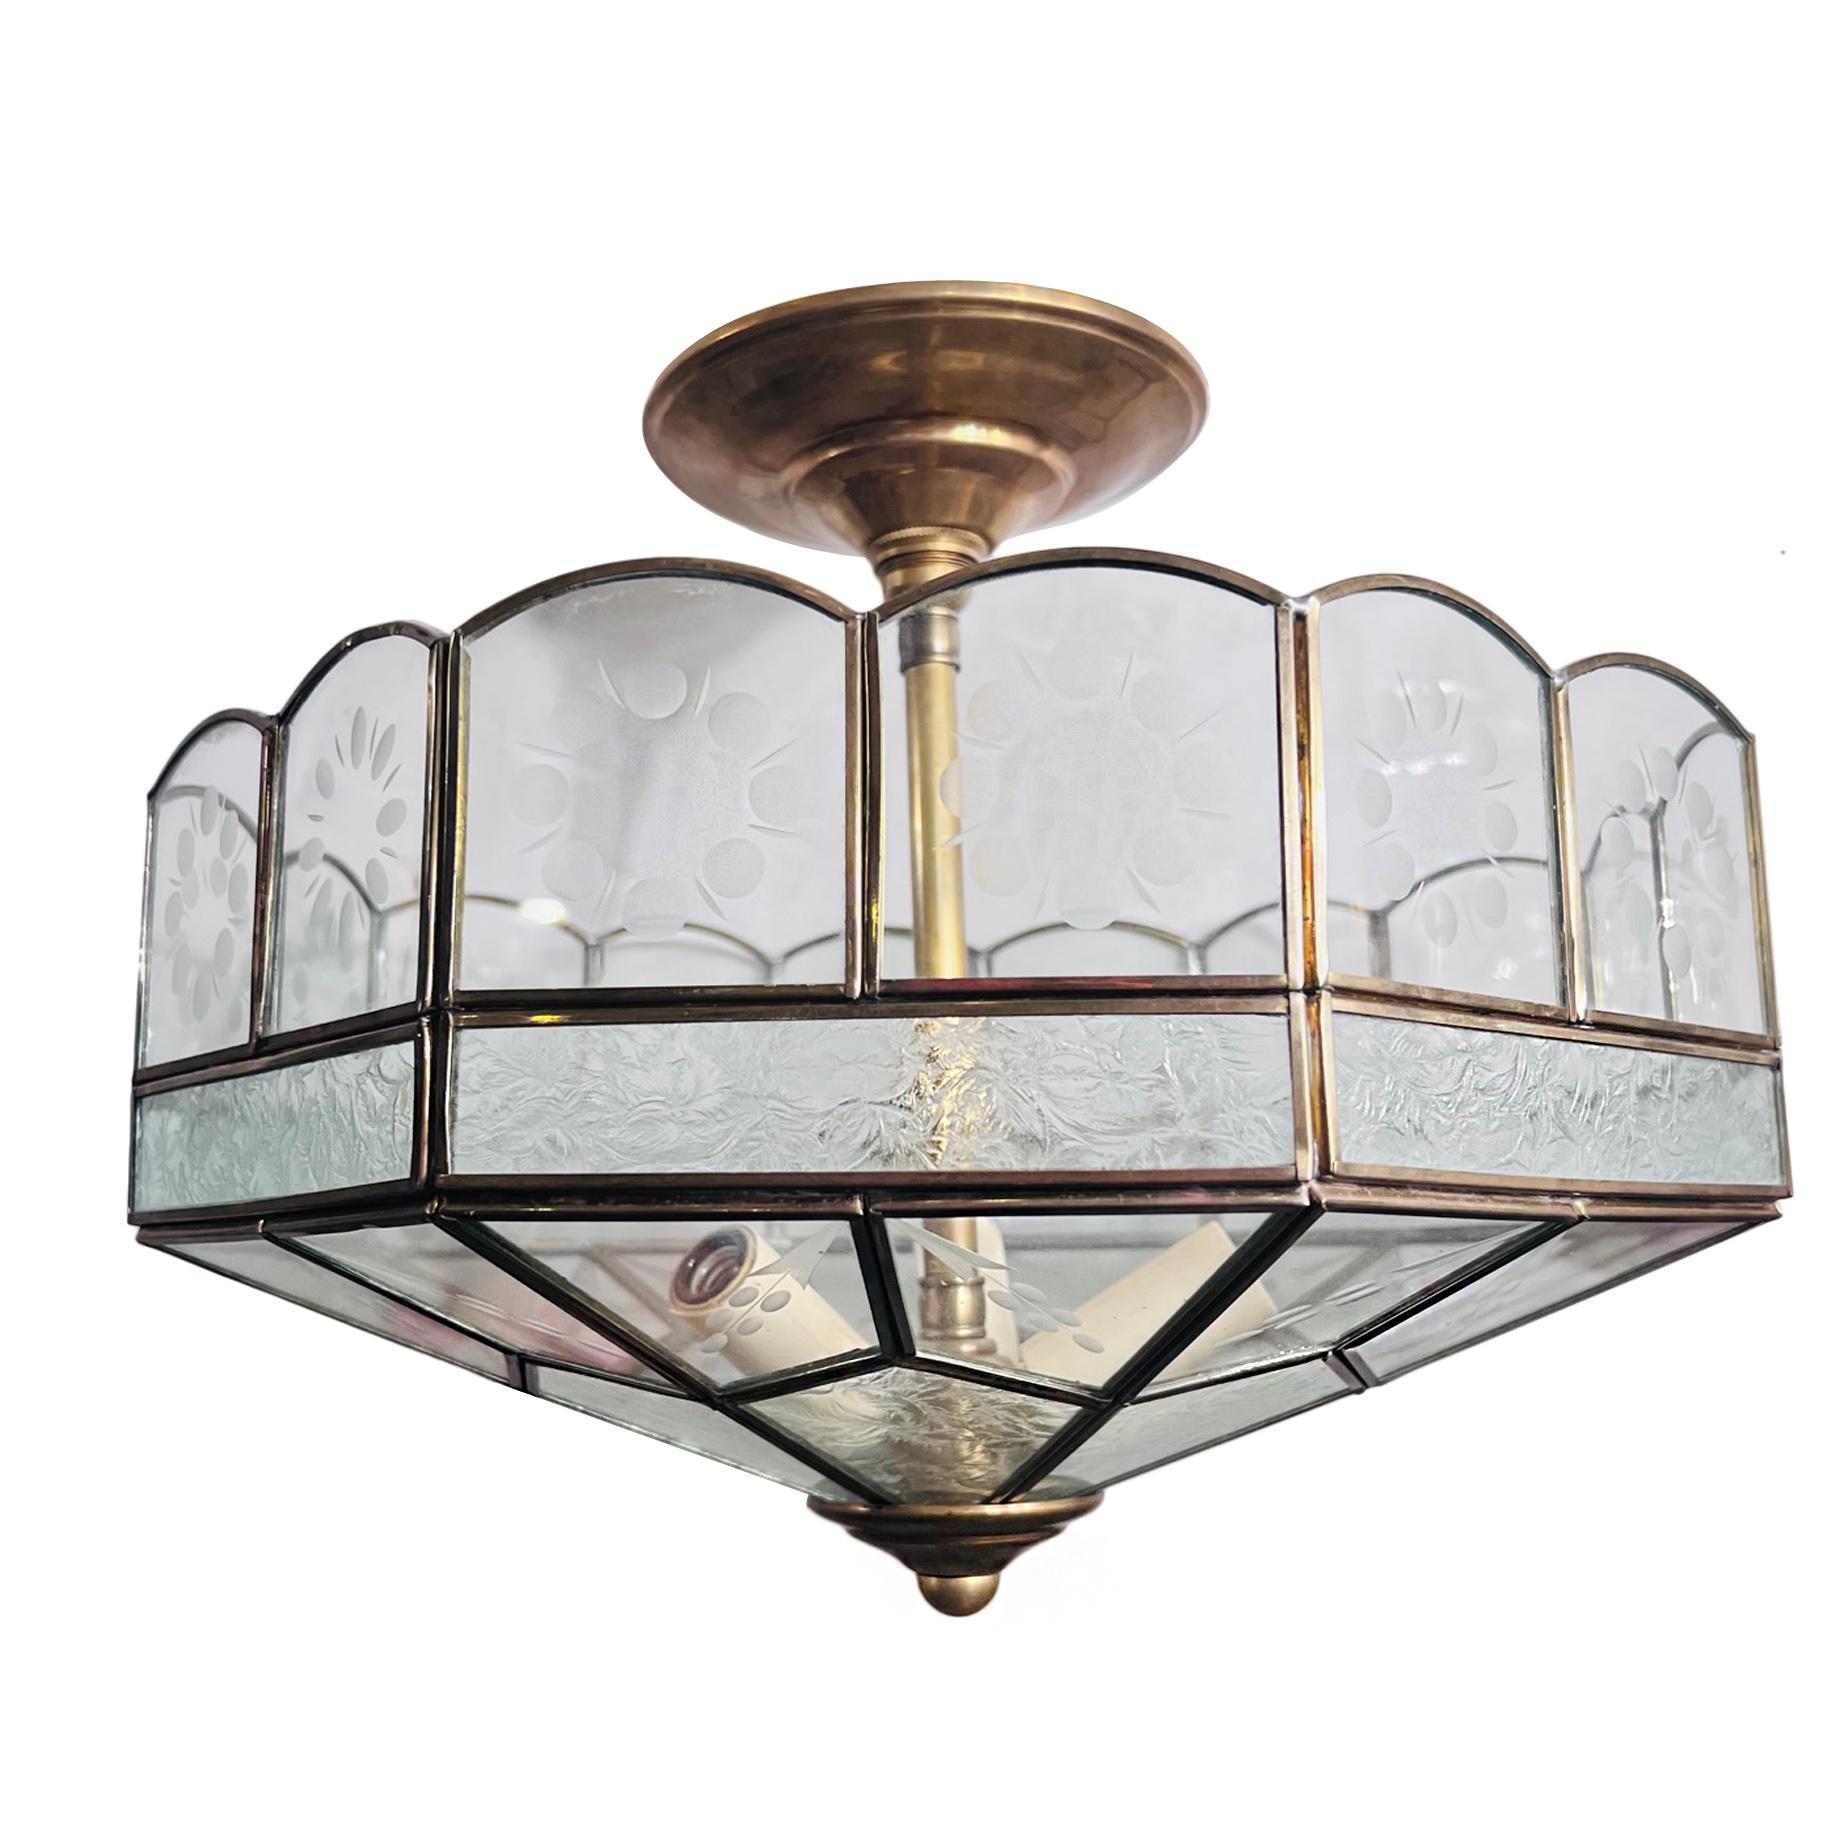 A circa 1960’s French leaded glass light fixture with 3 candelabra interior lights.

Measurements:
Present drop: 12?
Diameter: 13.5?